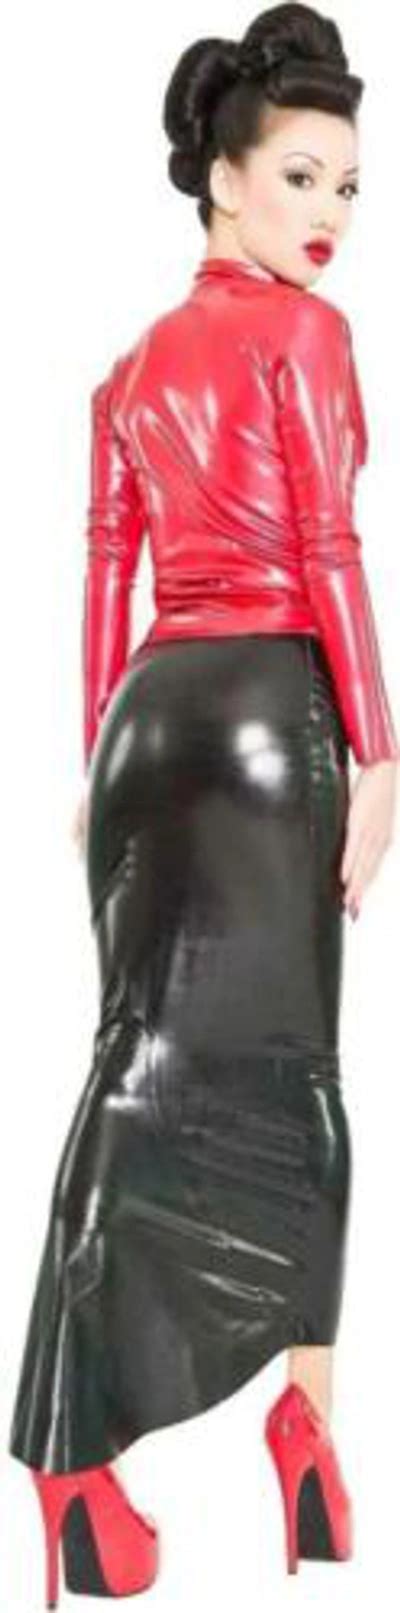 Pre Owned Westward Bound Fishtail Latex Hobble Skirt Black With Black